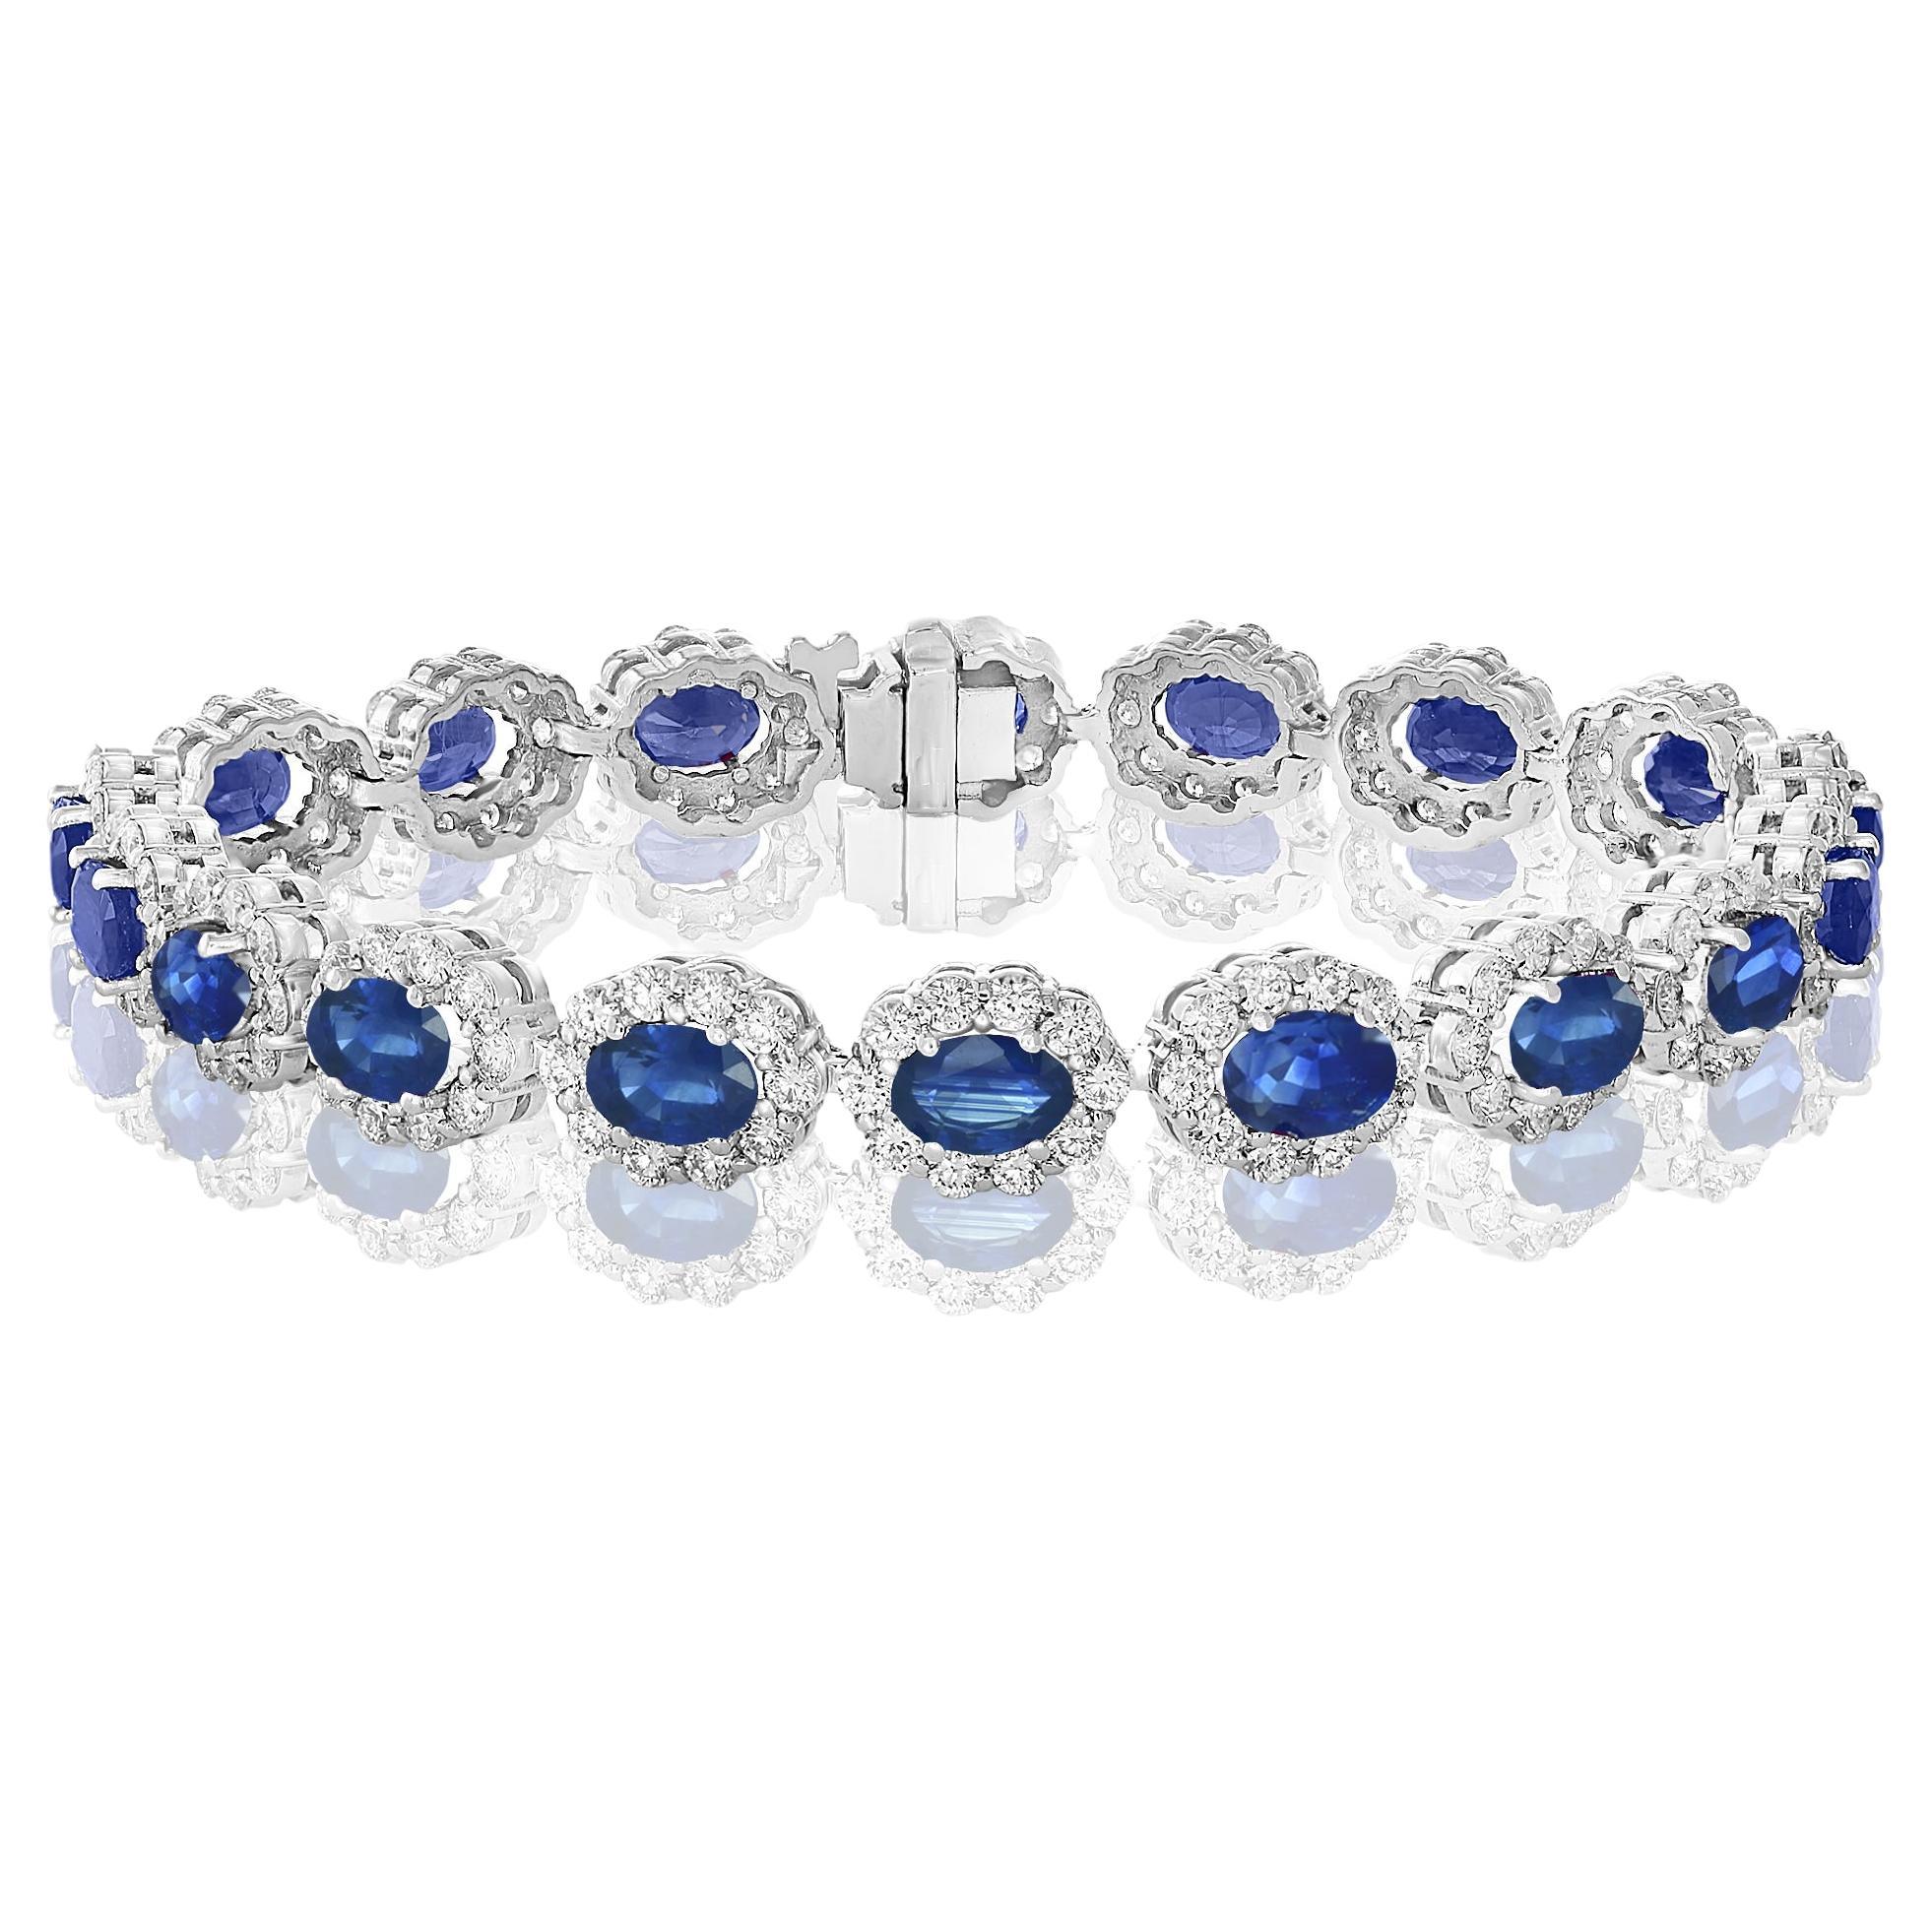 13.88 Carat Oval Cut Blue Sapphire and Diamond Halo Bracelet in 14K White Gold For Sale